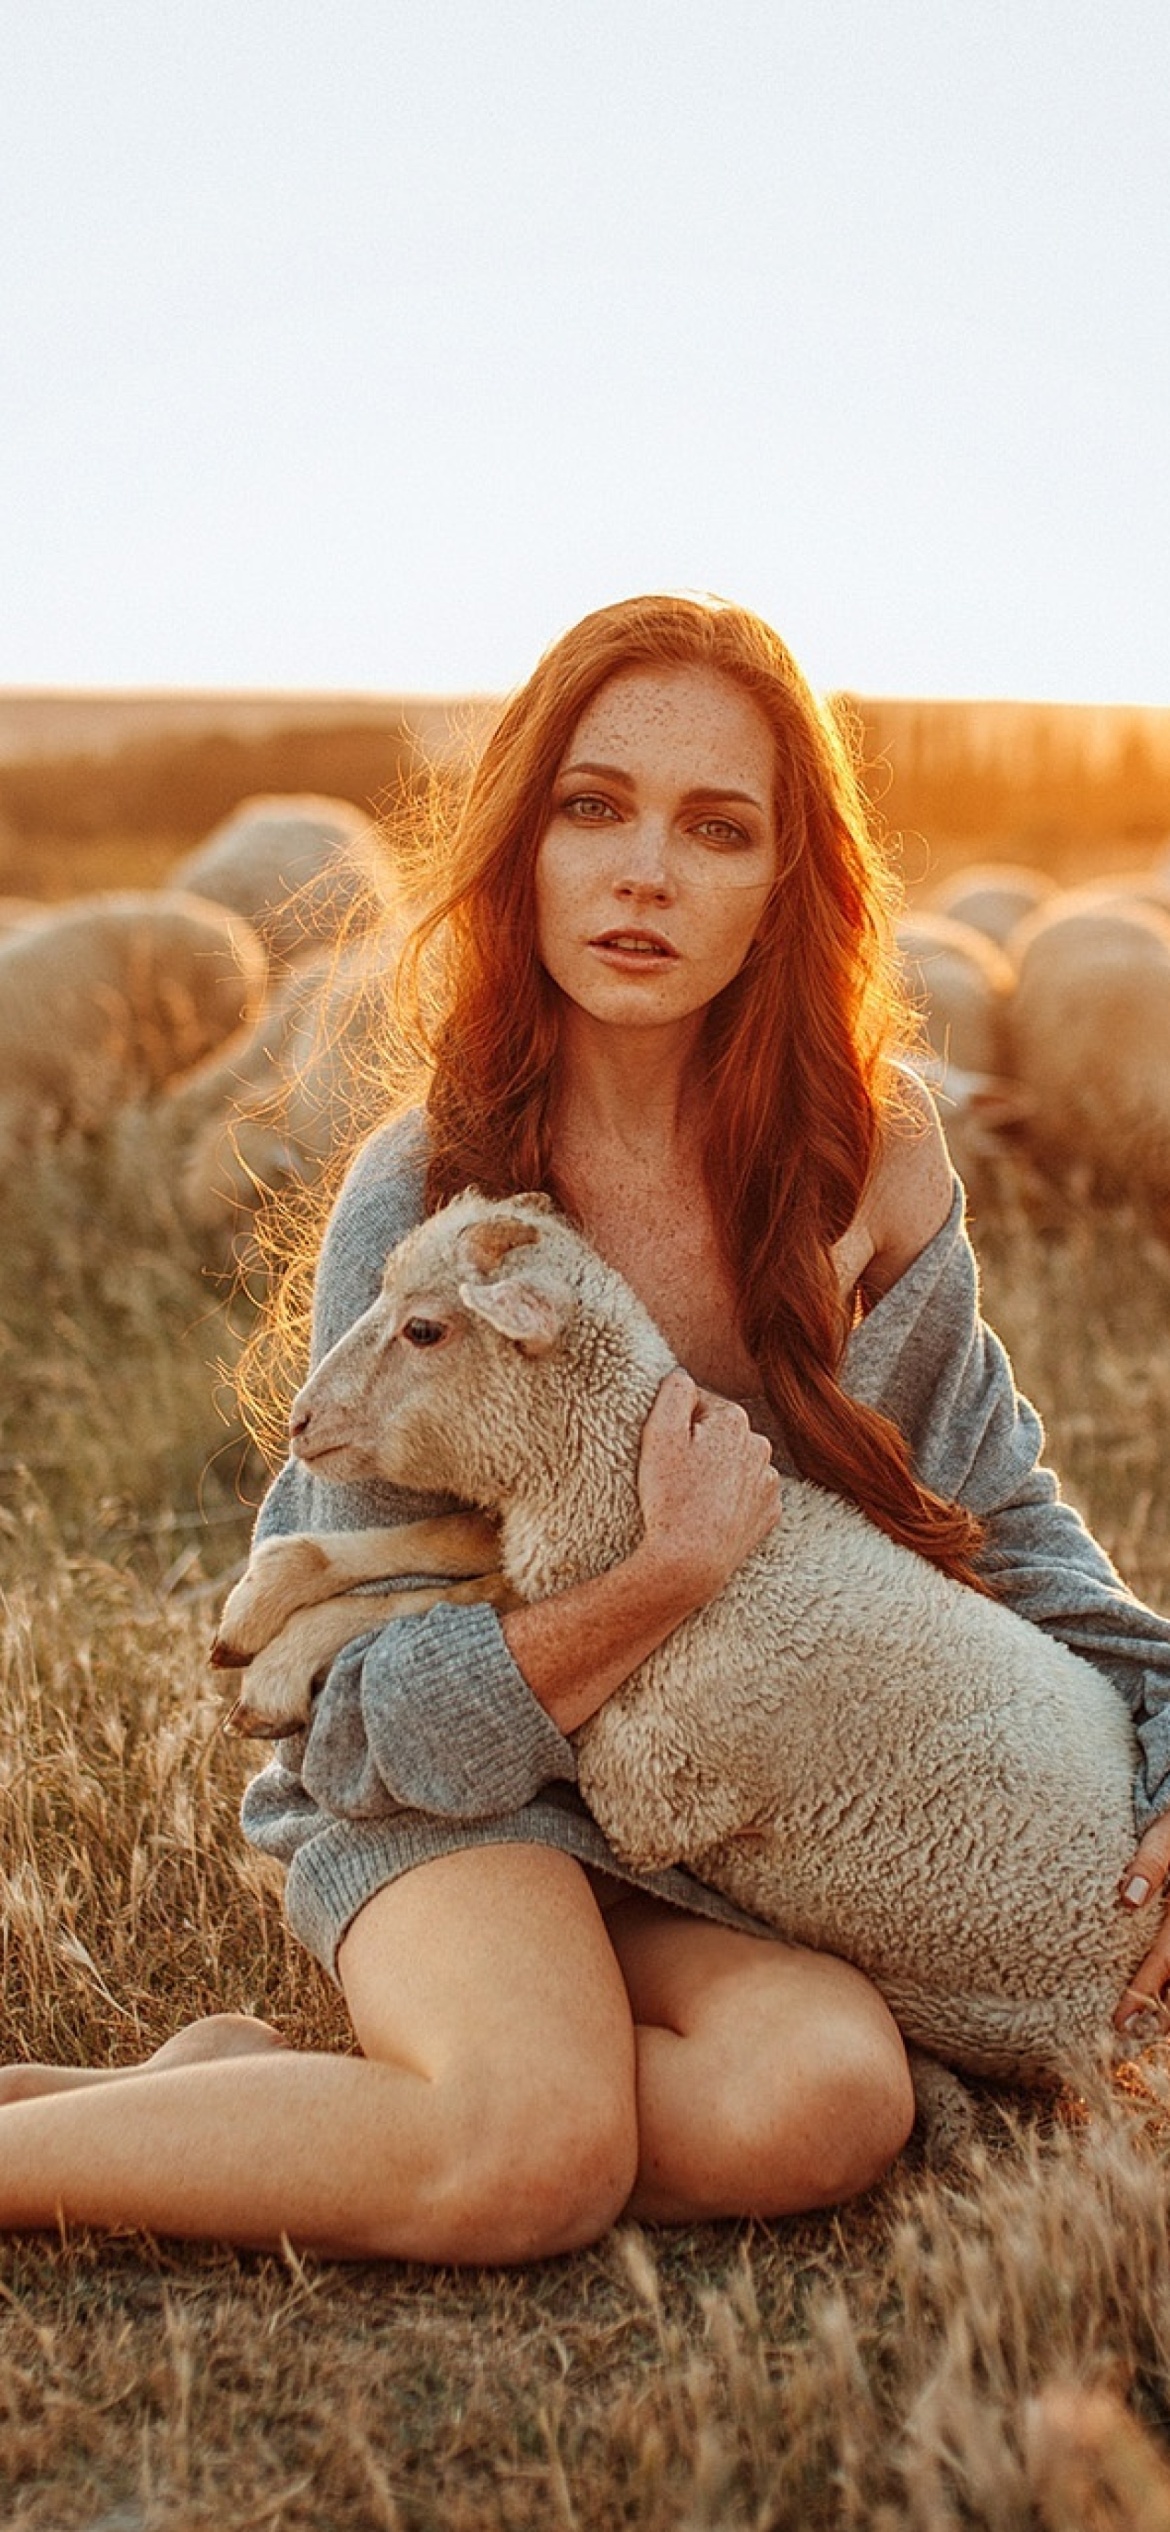 Girl with Sheep wallpaper 1170x2532